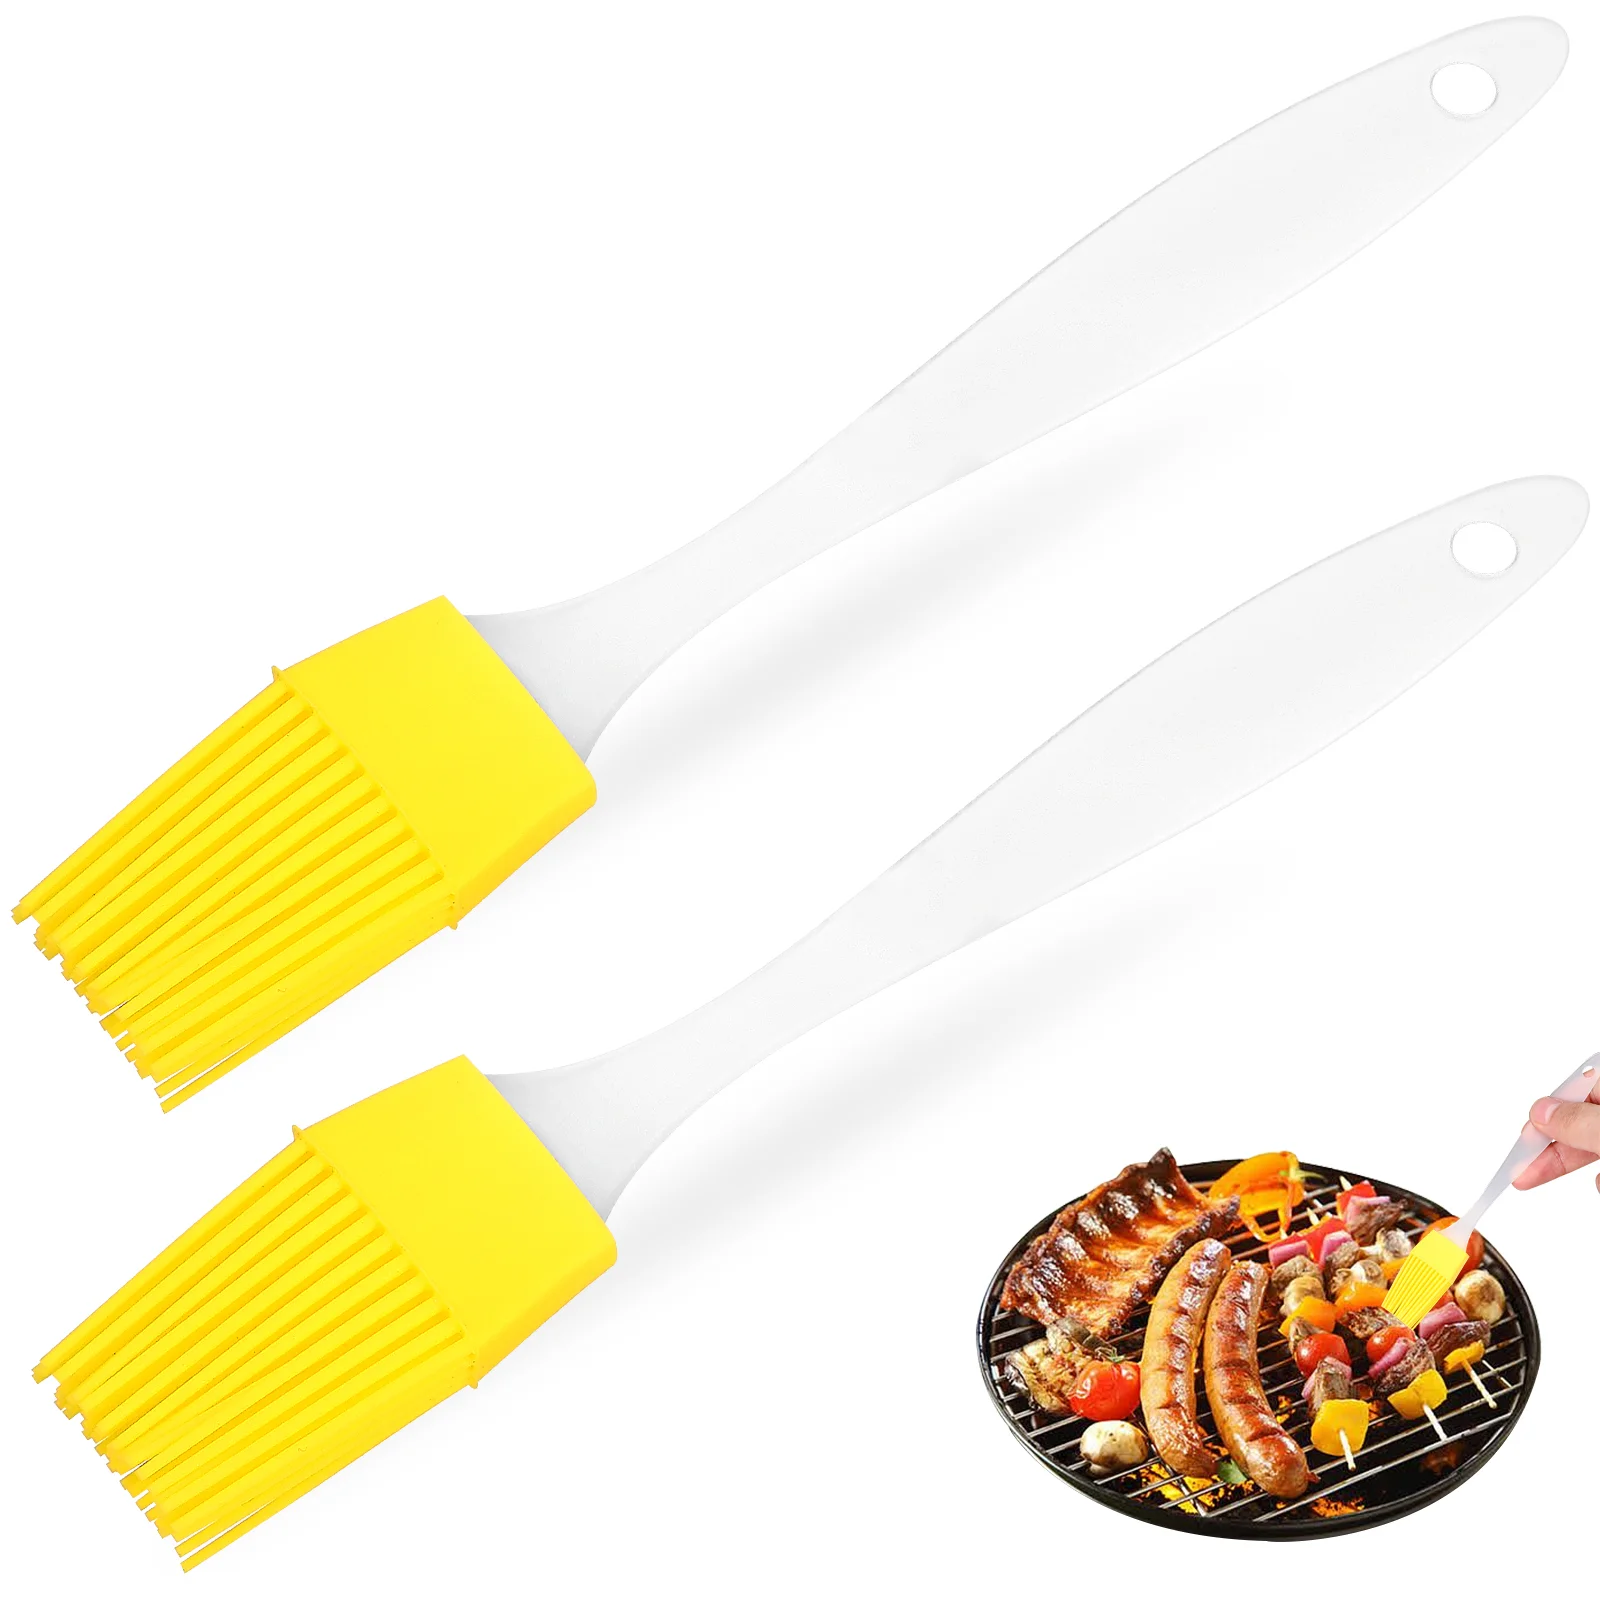 

Brush Pastry Basting Cooking Silicone Baking Bbq Sauce Oil Grill Brushes Kitchen Resistant Heat Spatula Butter Meat Cake Turkey